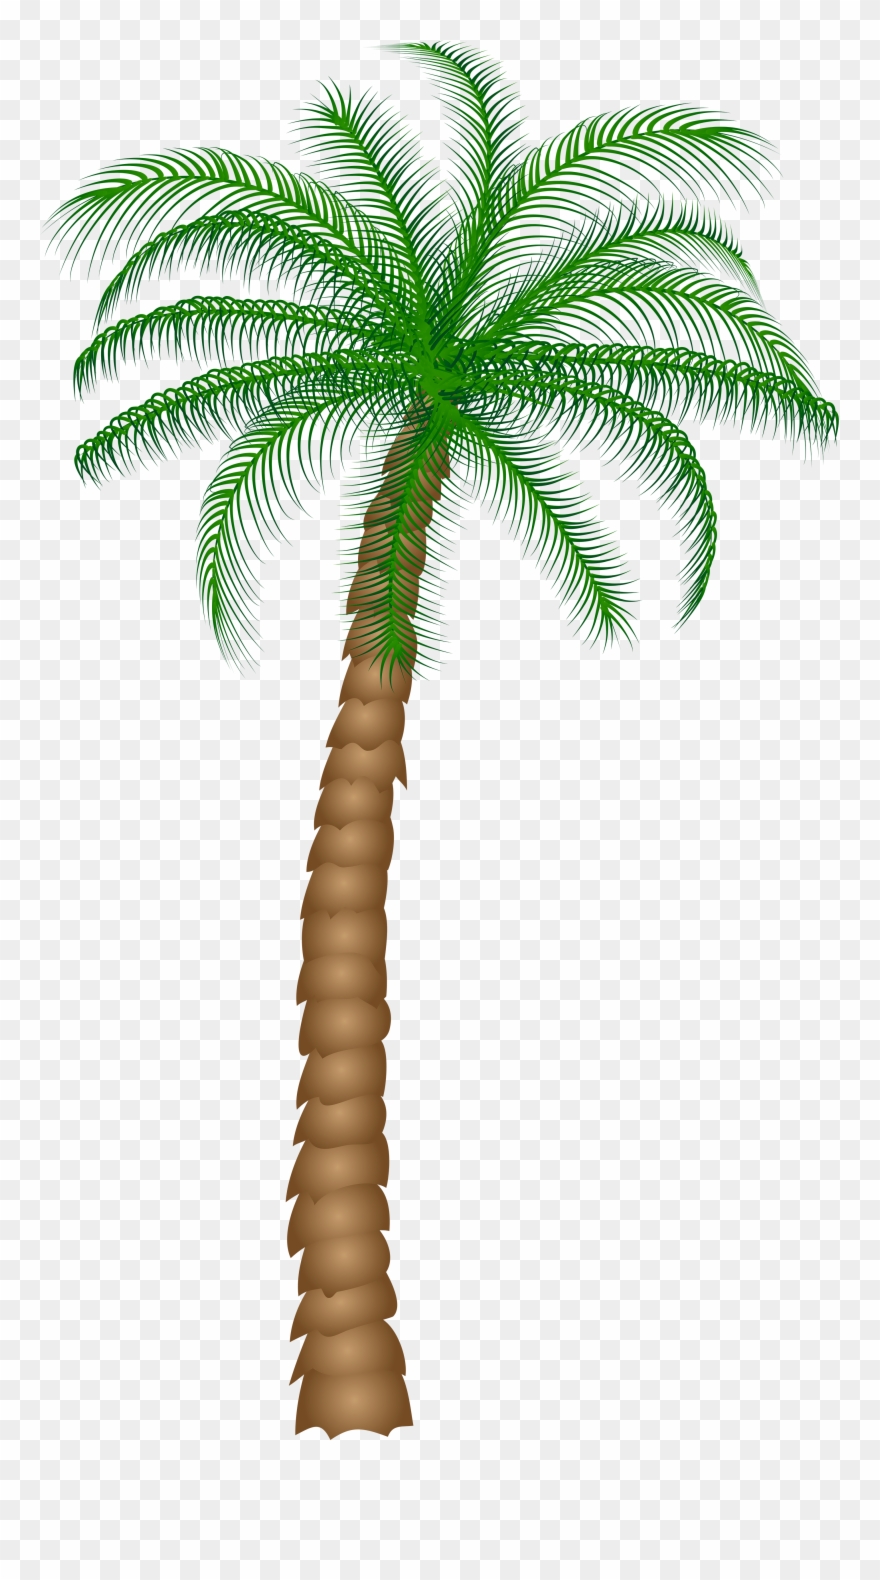 Date Palm Fruit Tree Clipart.